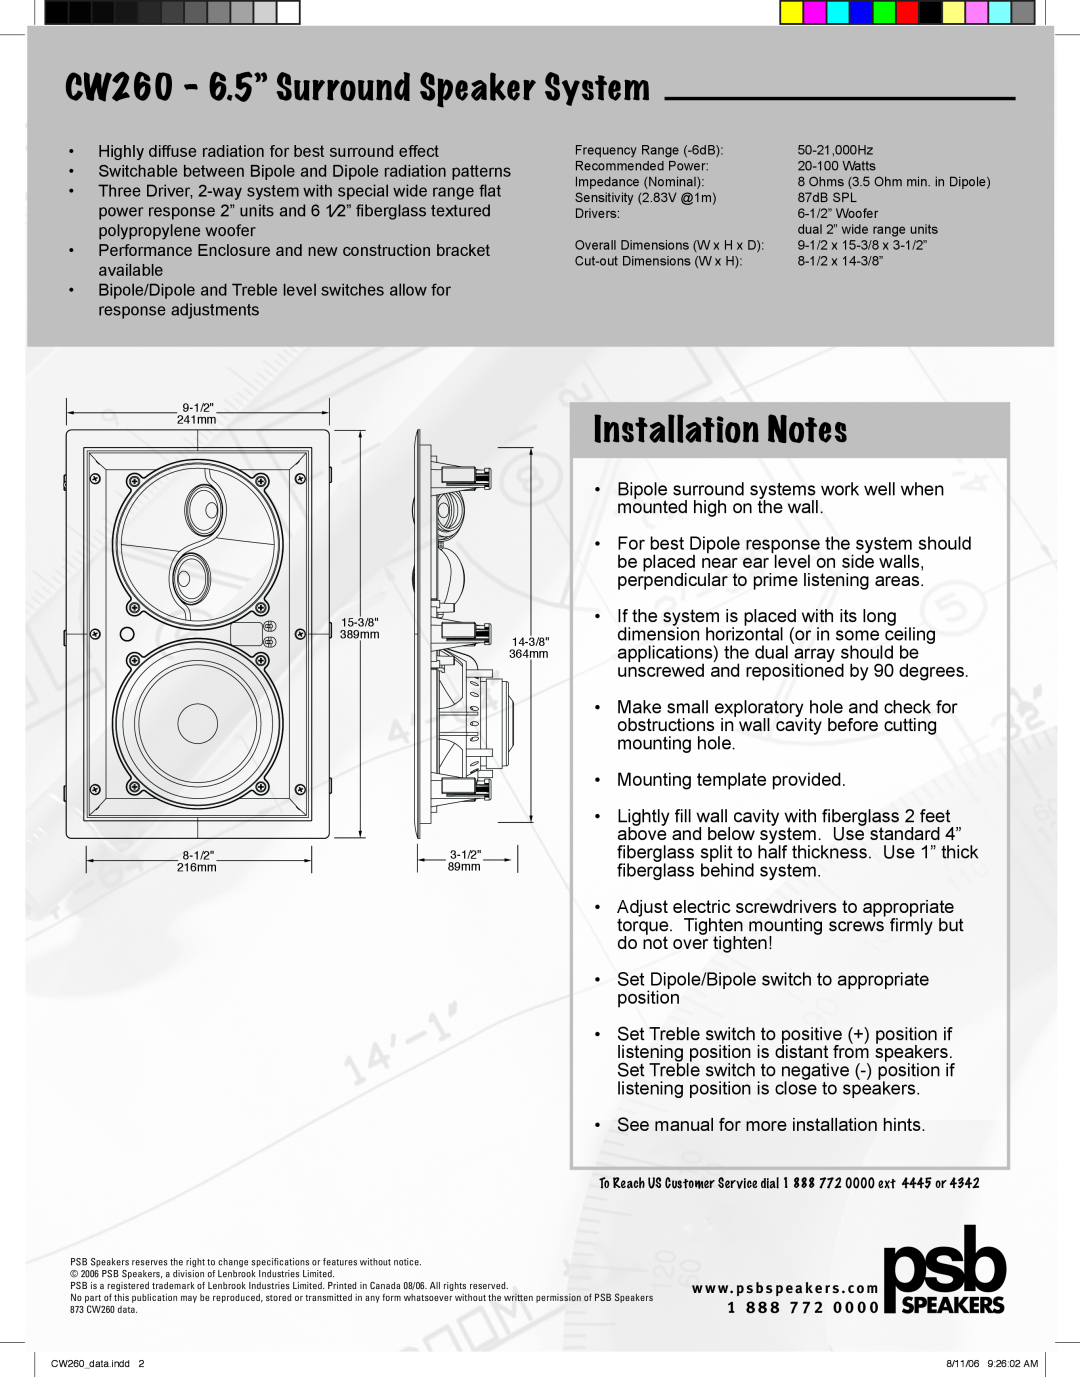 PSB Speakers manual CW260 - 6.5” Surround Speaker System, Installation Notes 